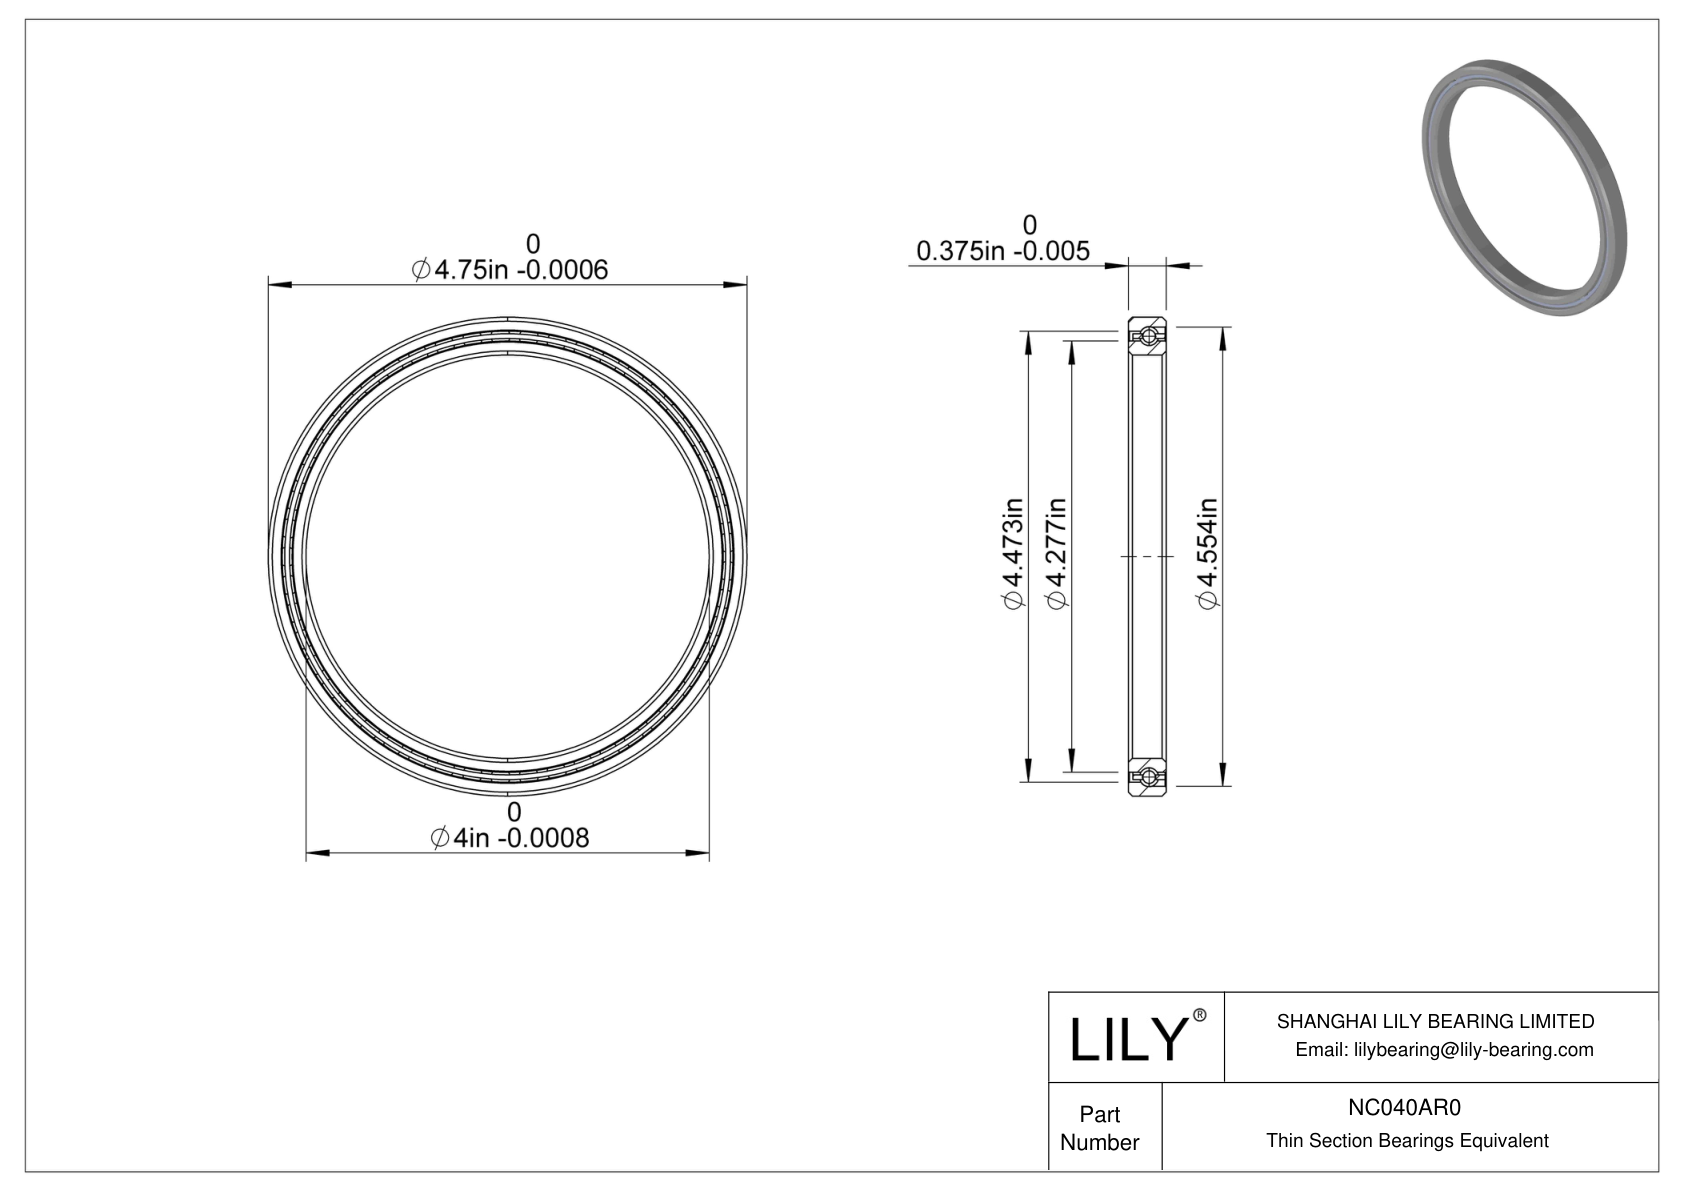 NC040AR0 Constant Section (CS) Bearings cad drawing